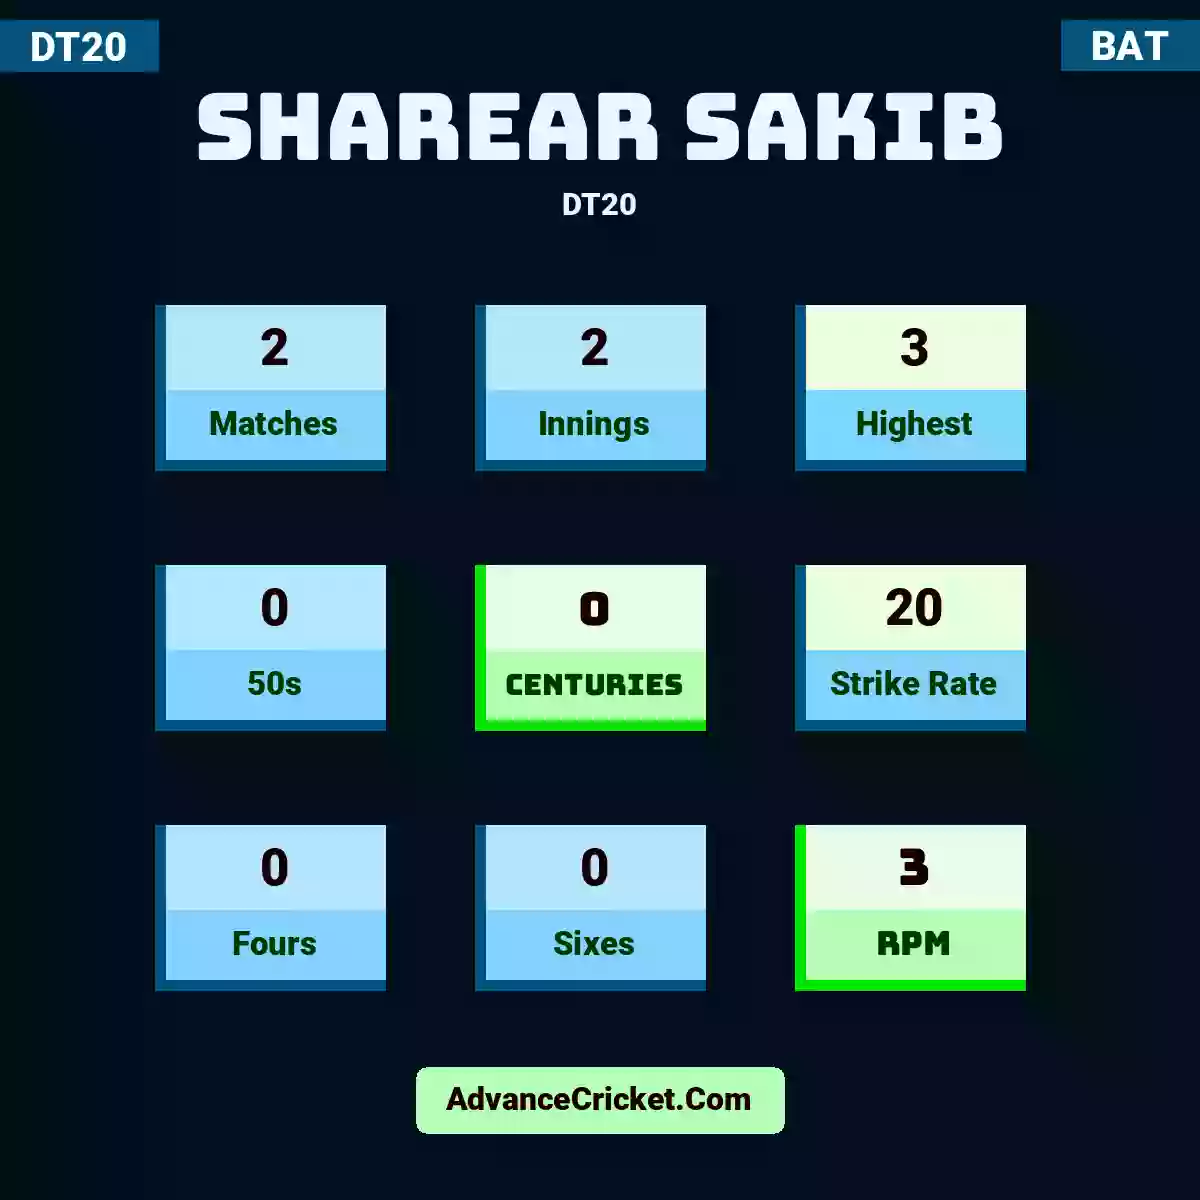 Sharear Sakib DT20 , Sharear Sakib played 2 matches, scored 3 runs as highest, 0 half-centuries, and 0 centuries, with a strike rate of 20. S.Sakib hit 0 fours and 0 sixes, with an RPM of 3.